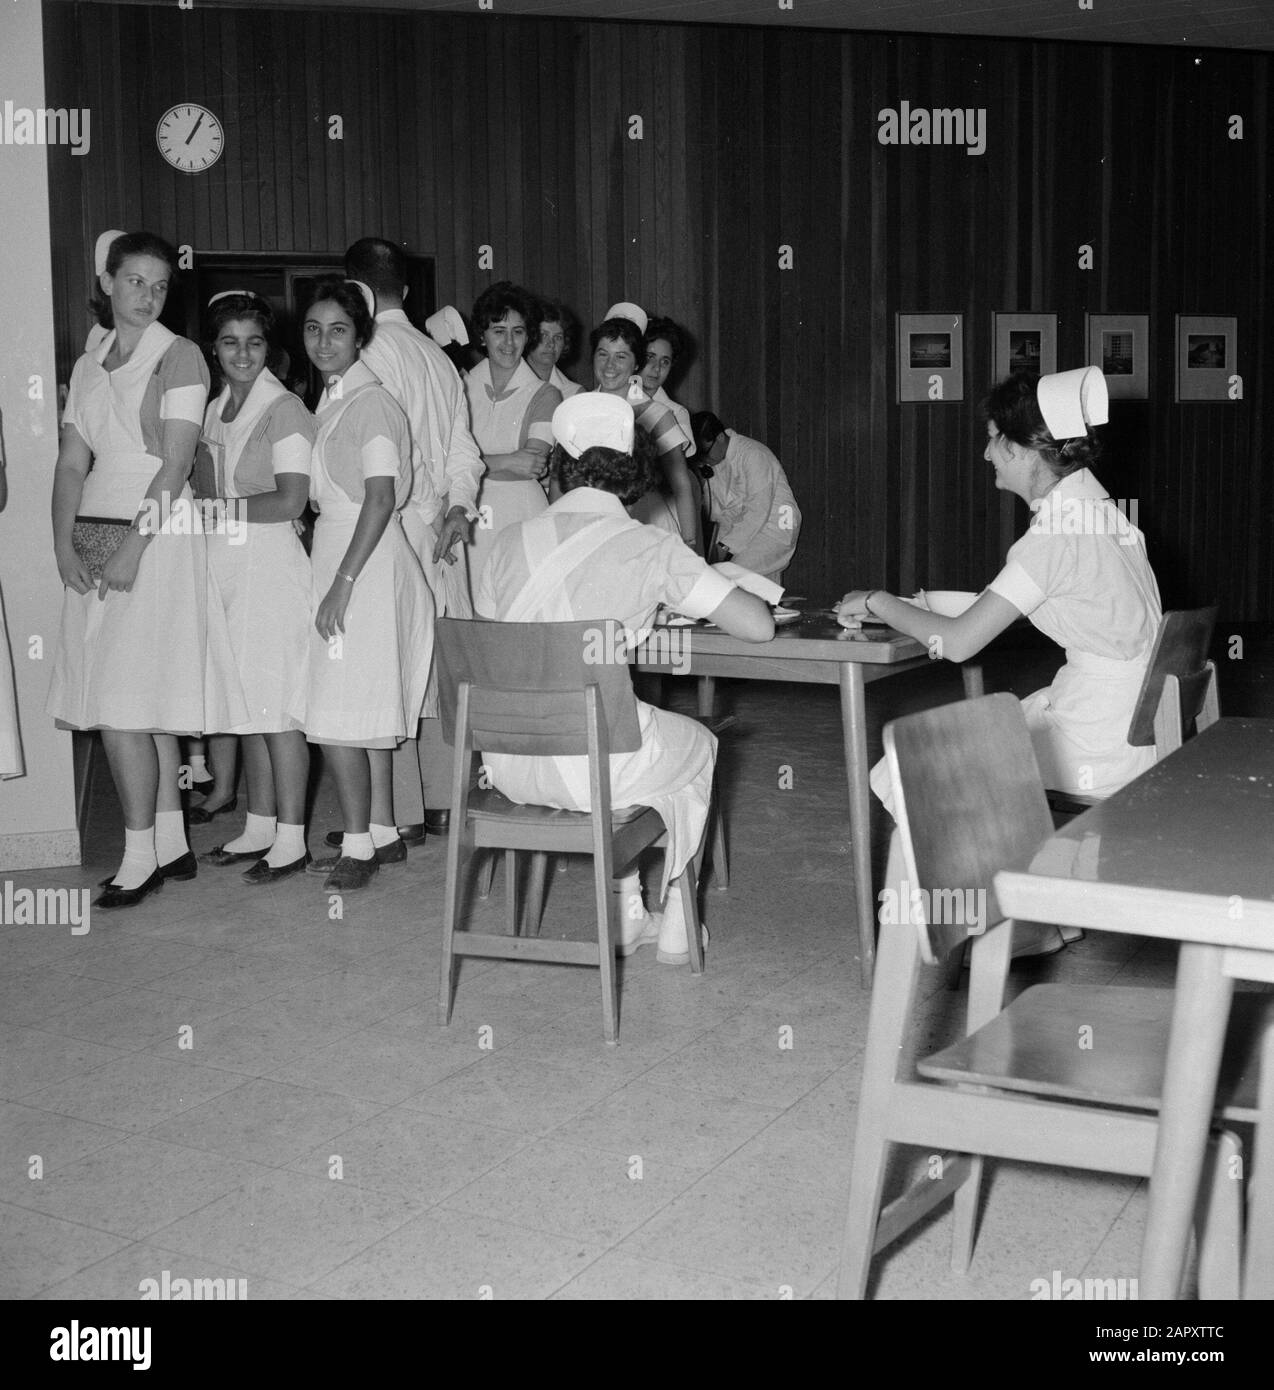 Nursing staff in the canteen of the Beilinson Hospital at Petah Tikwa Date: January 1, 1960 Location: Israel, Petach Tikwah Keywords: restaurants, chairs, uniforms, nurses, hospitals Personal name: Beilinson, Moshe Stock Photo